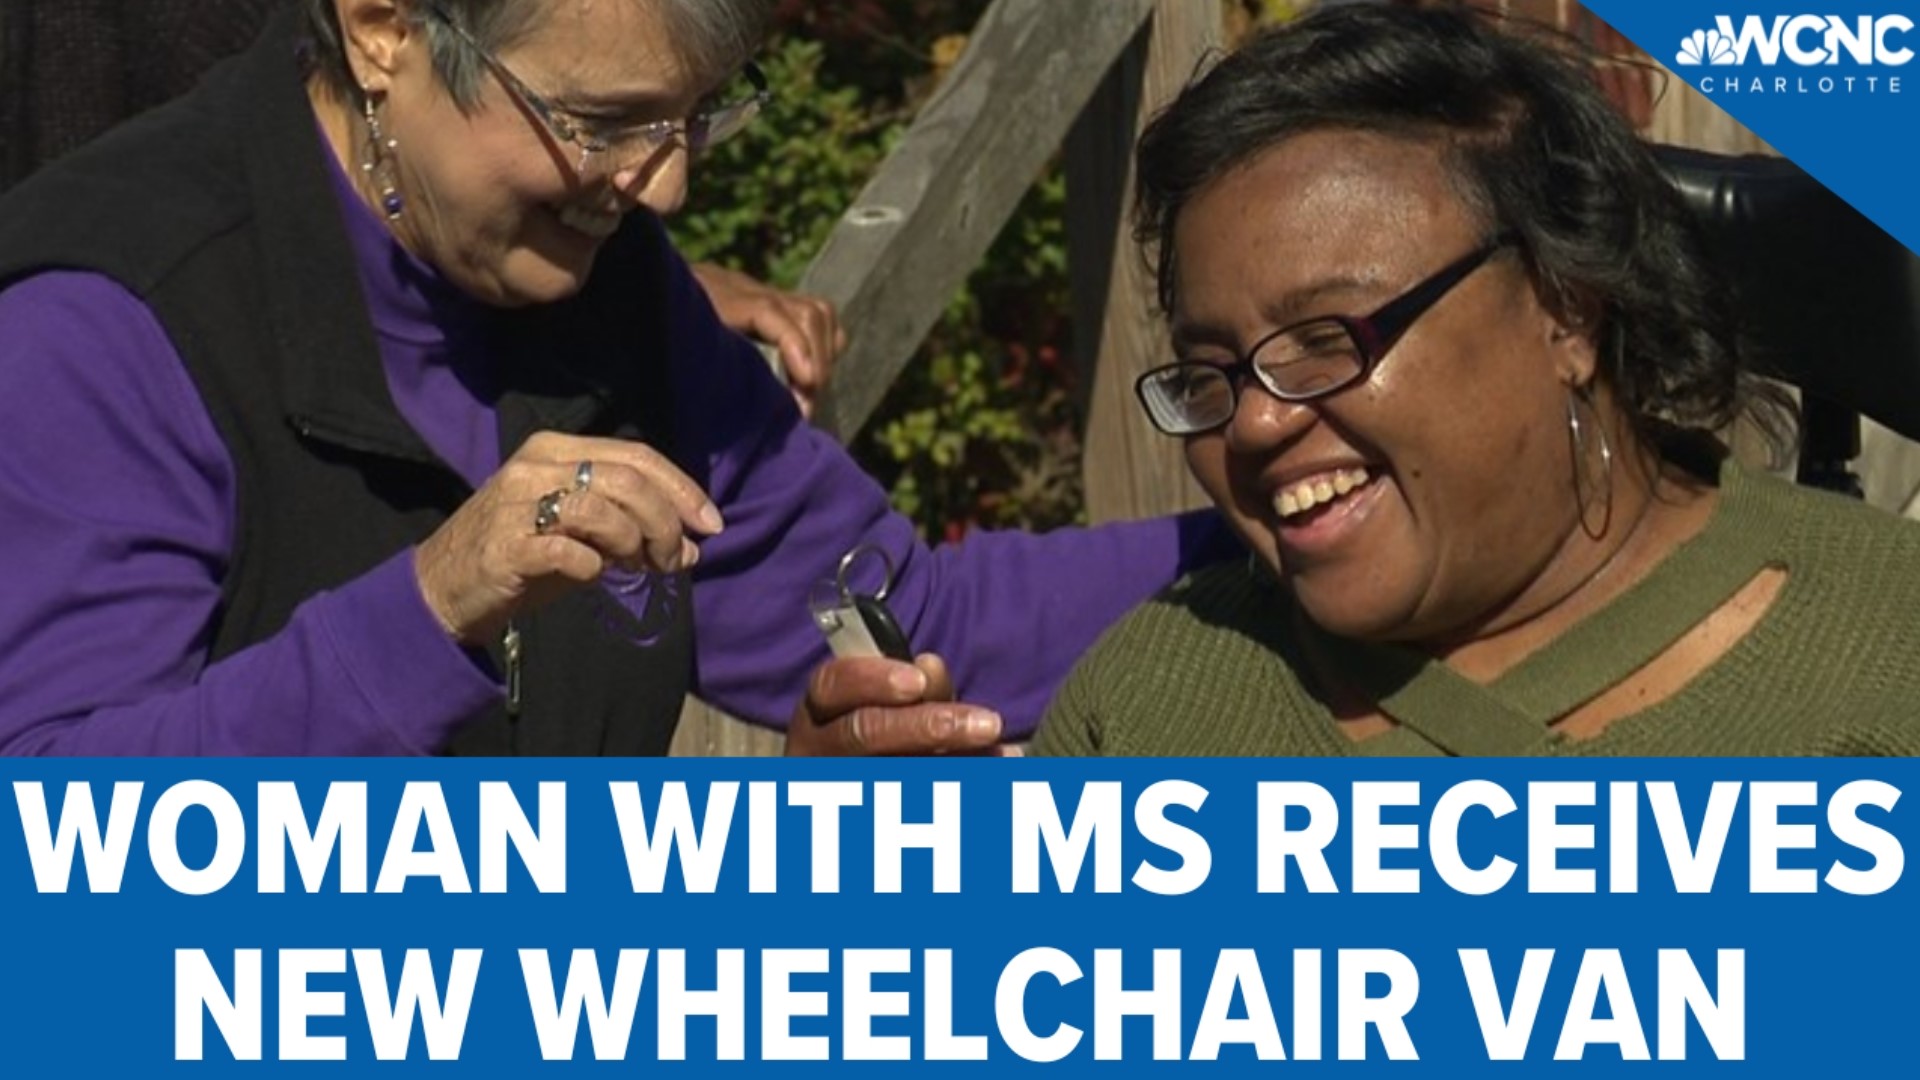 A Charlotte woman with multiple sclerosis was surprised with a new wheelchair van on Giving Tuesday thanks to All Things Possible Medical Fundraising.